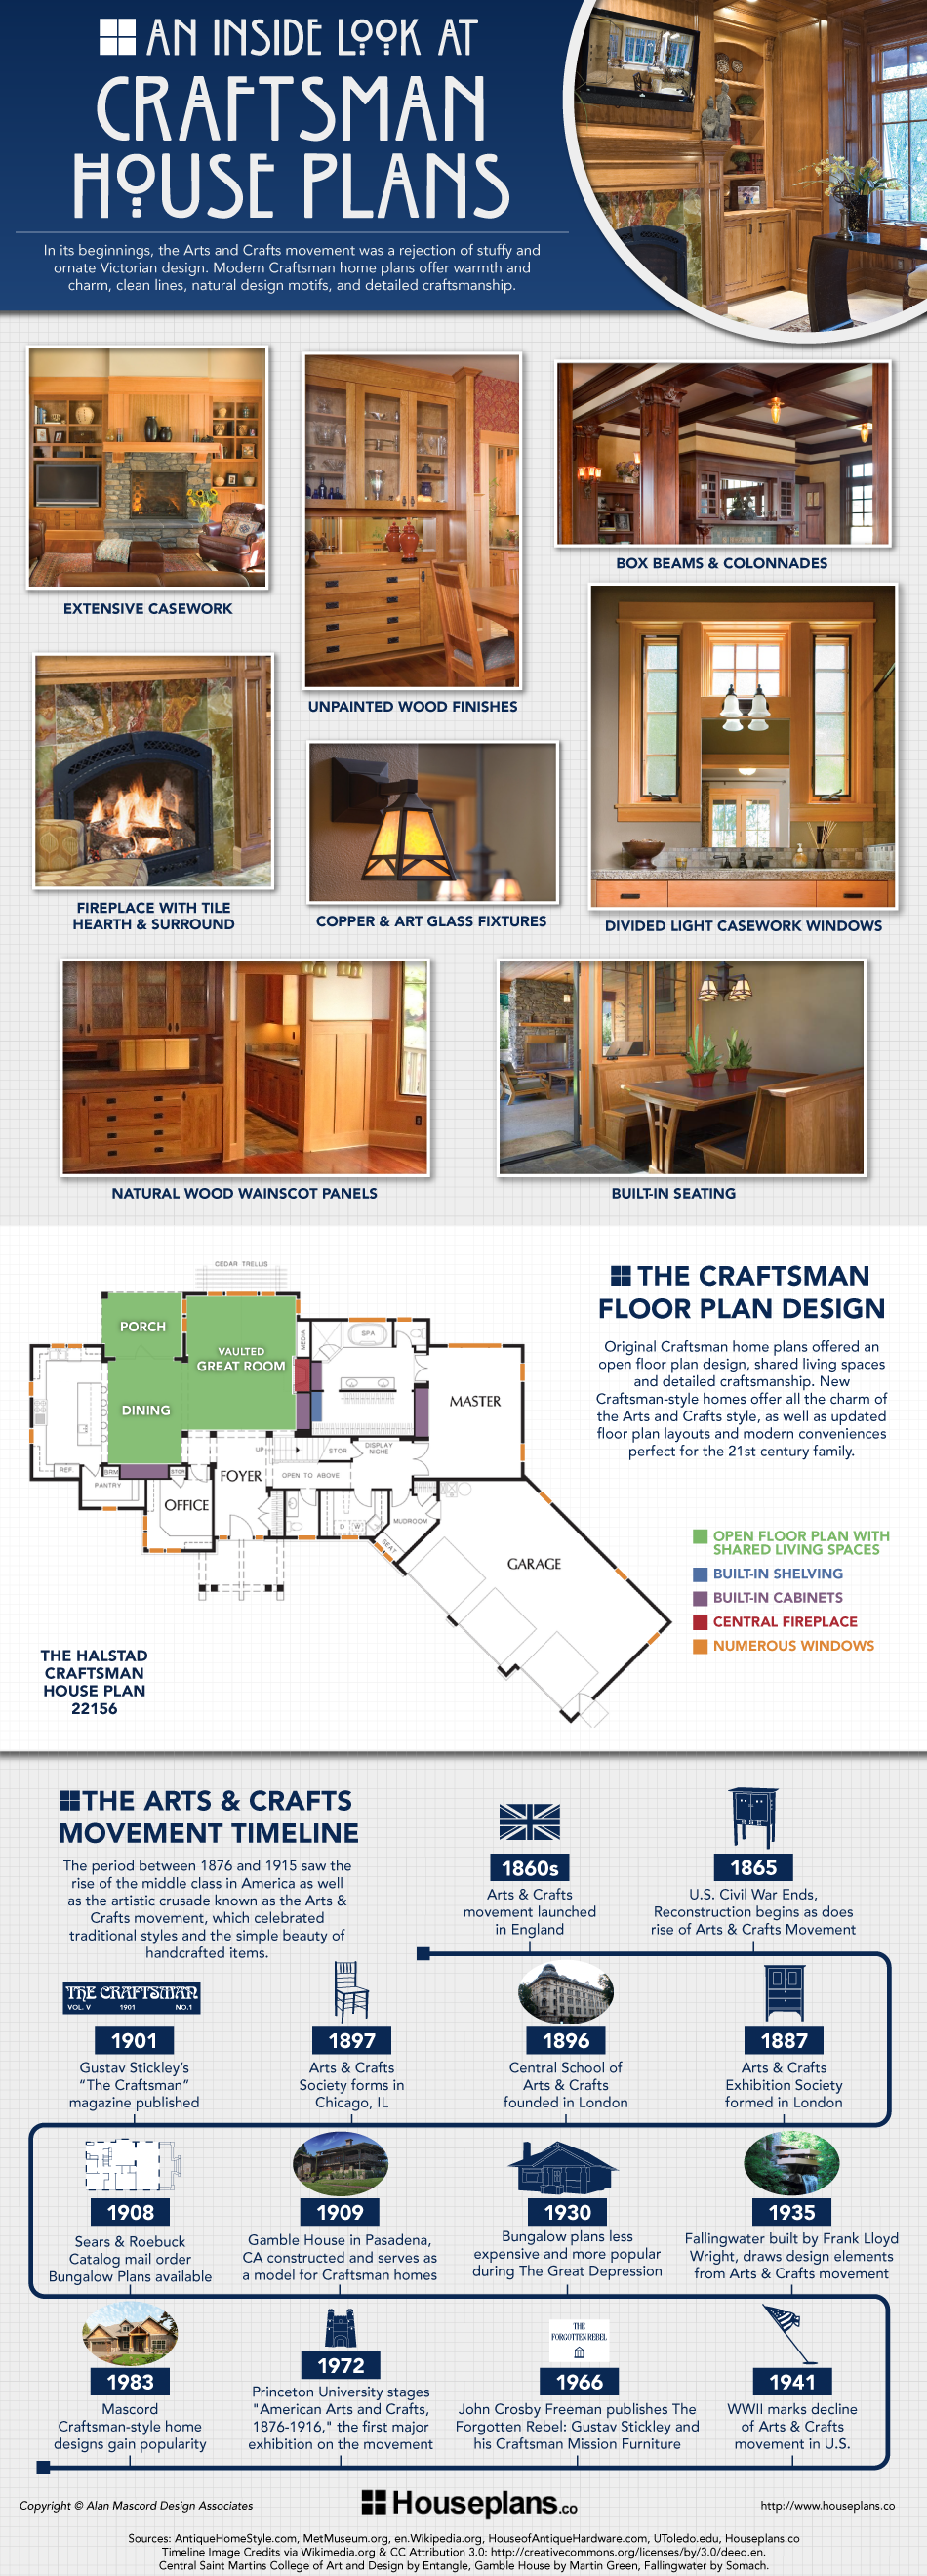 An Inside Look at Craftsman House Plans